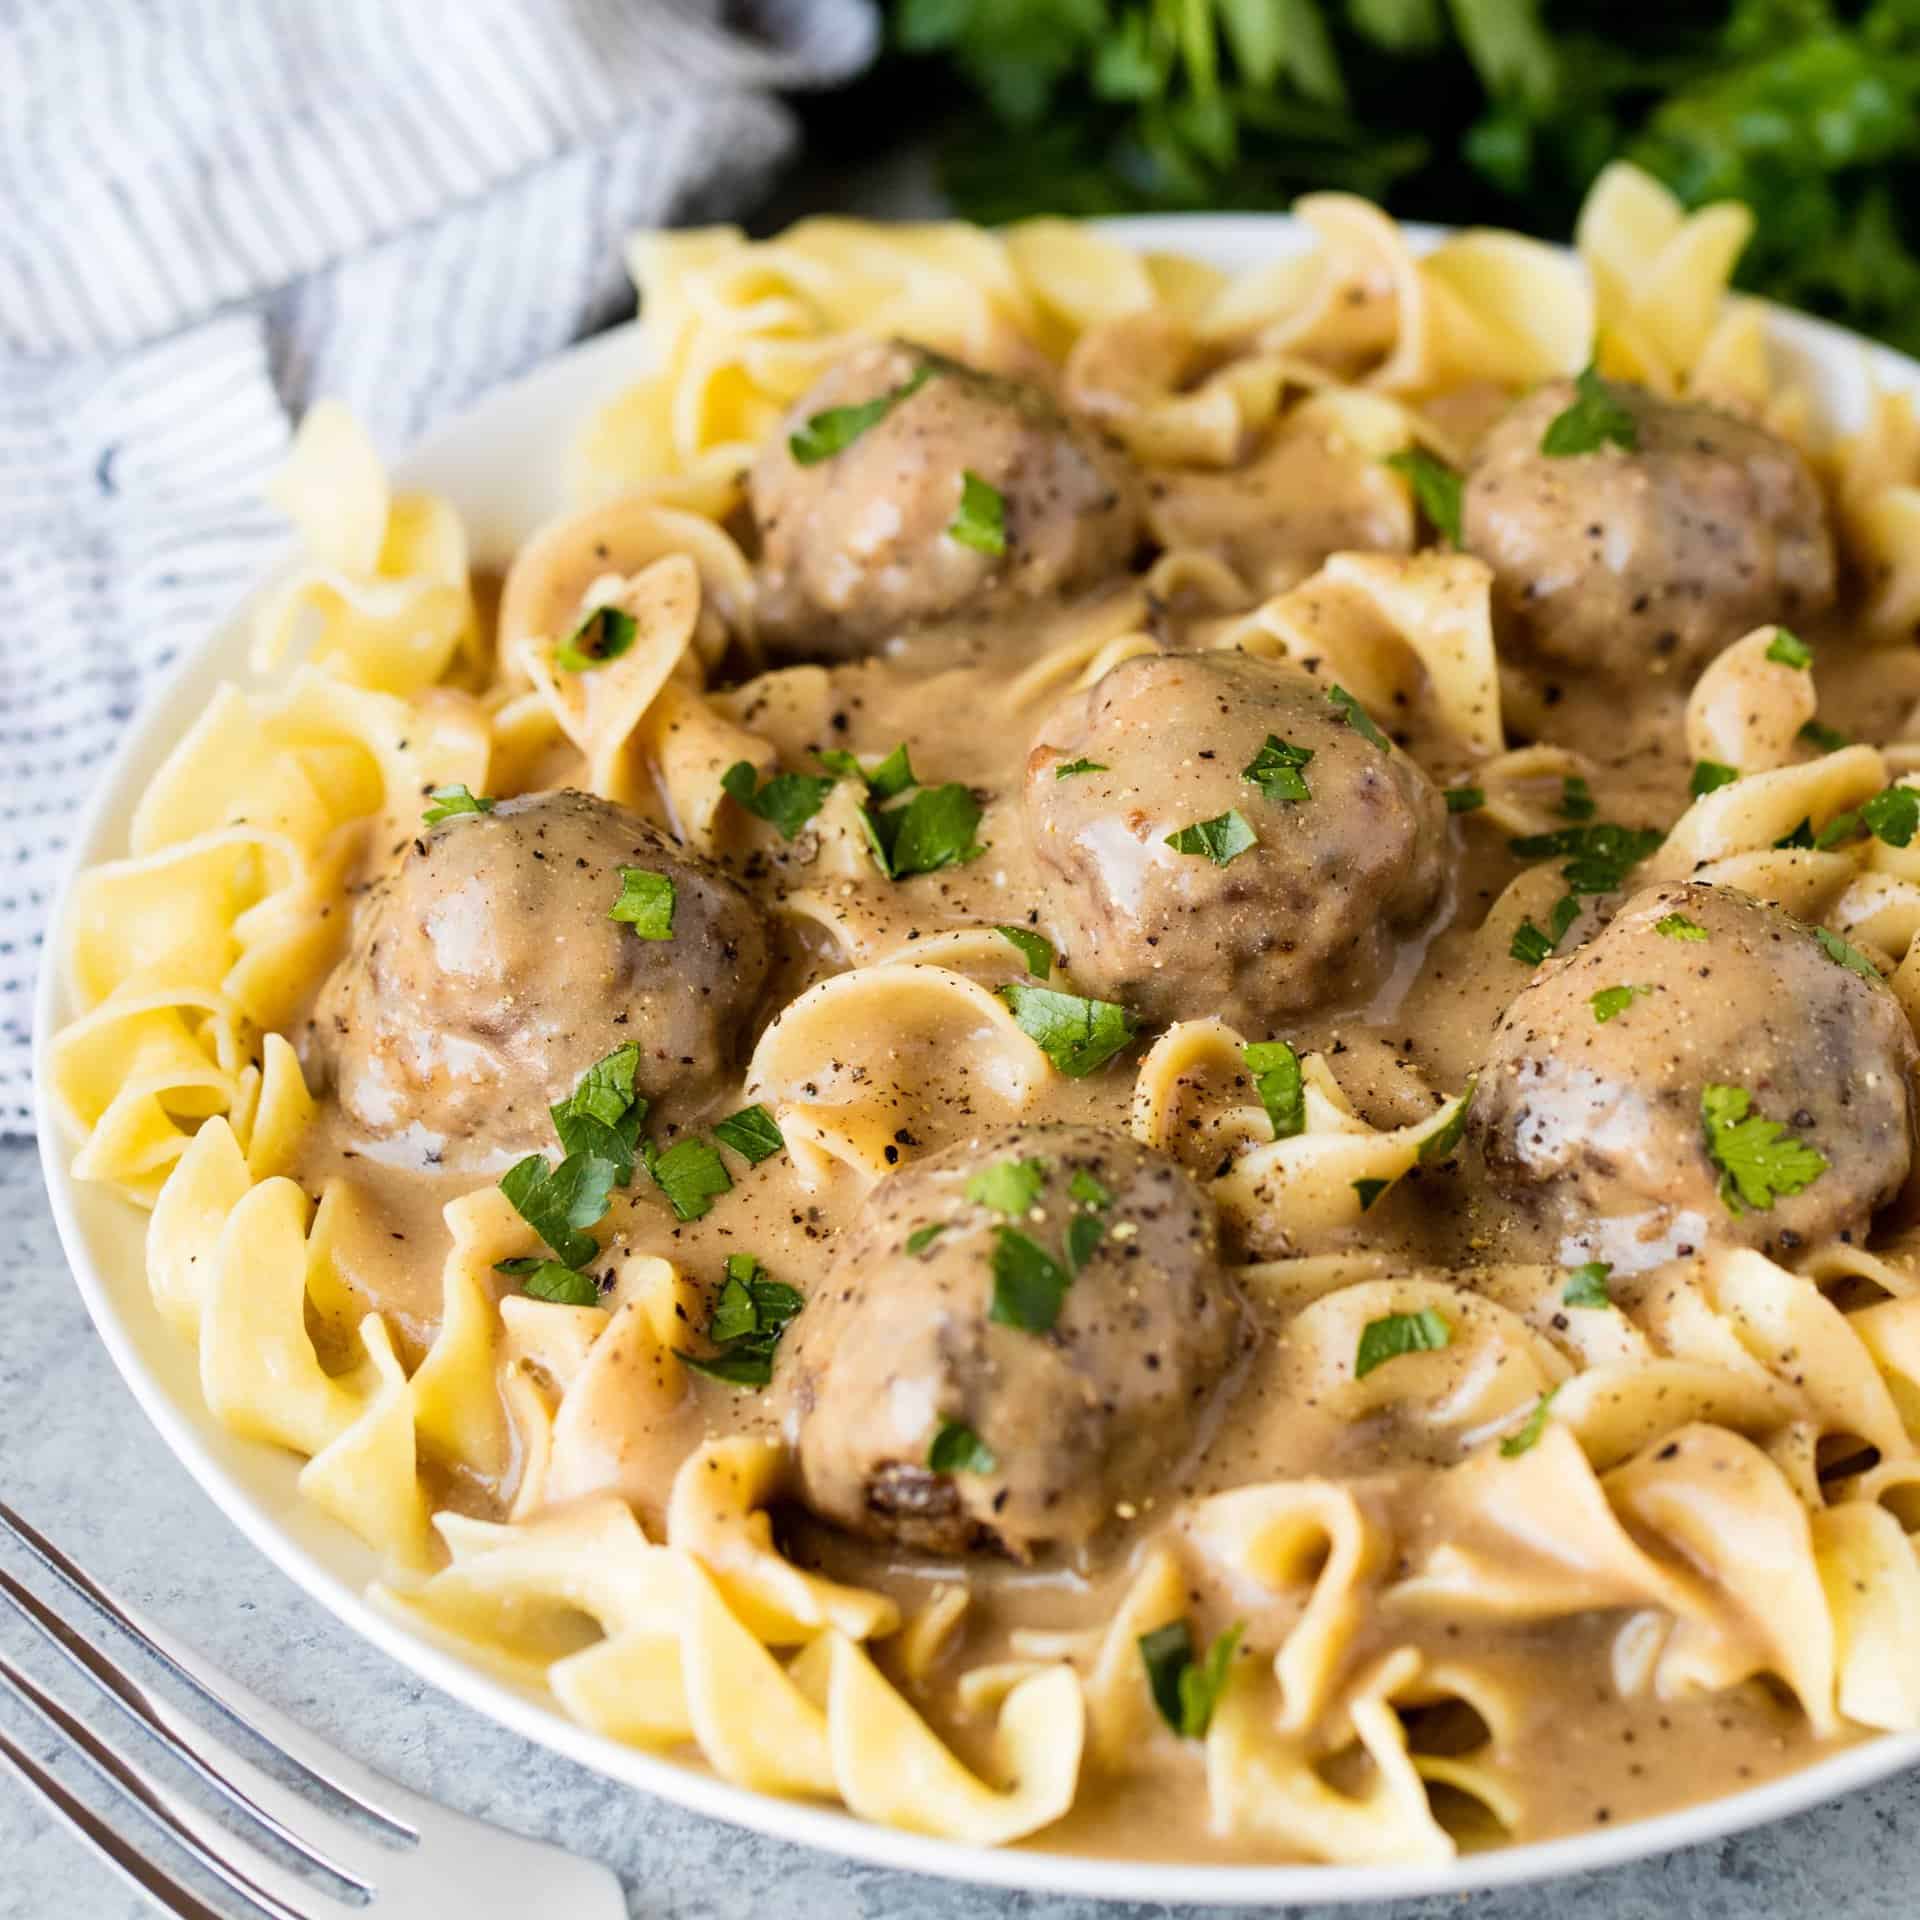 The Best Swedish Meatballs and Gravy are made with a combination of ground pork and beef and spiced to perfection for a flavorful meatball and with a rich and flavorful gravy to go with it!